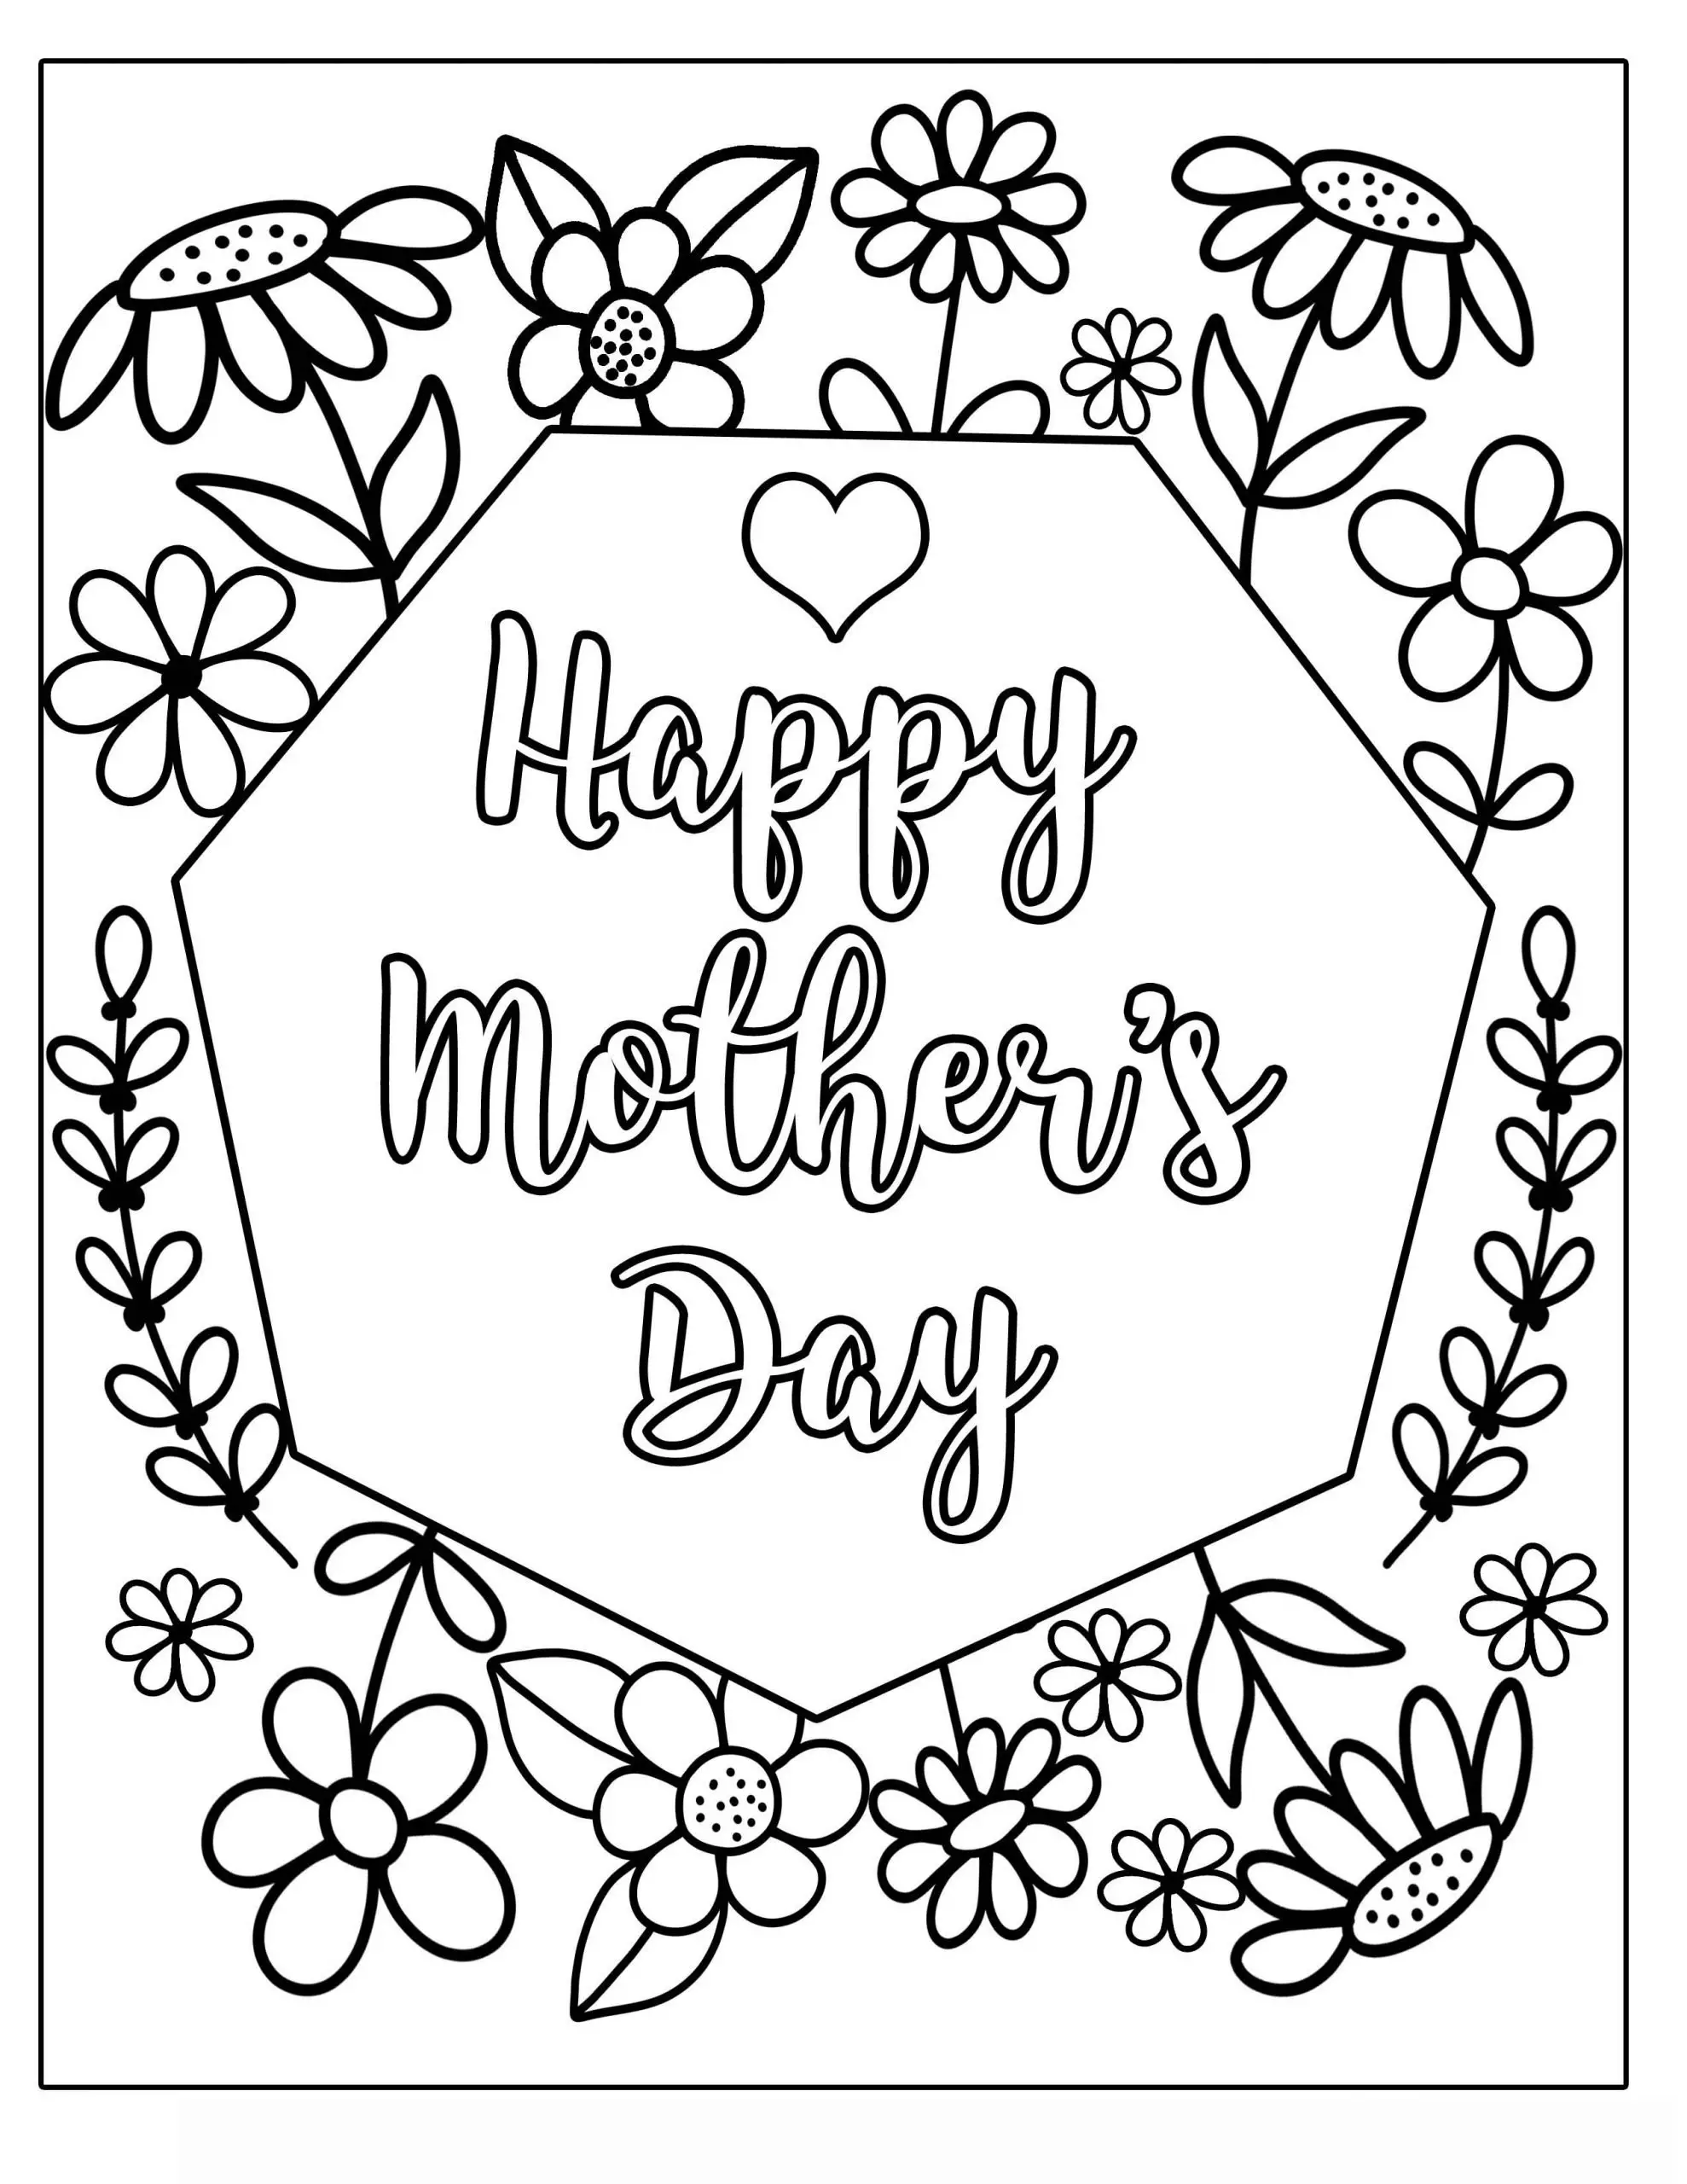 Happy MOTHERS DAY MOTHER'S DAY flower with vines and frills Clipart Coloring Pages for Kids Adults Art Activities Line Art